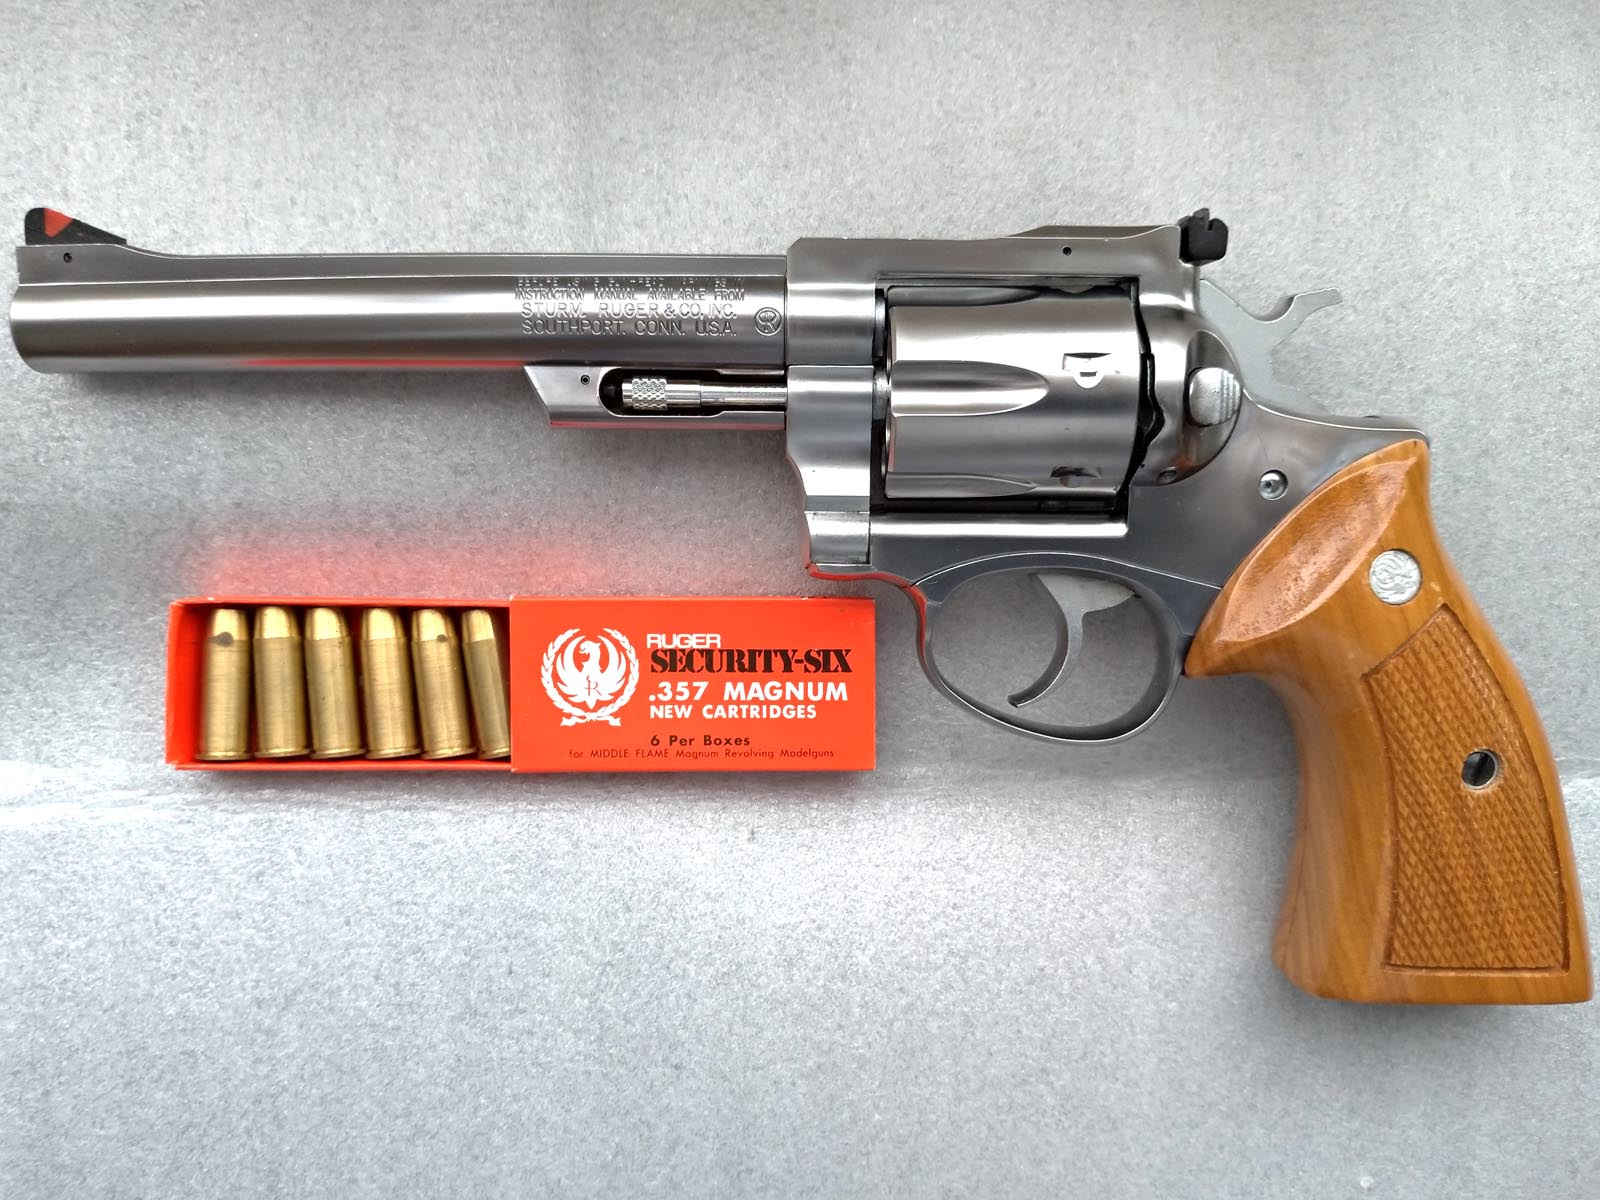 WESTERN ARMS/ウエスタンアームズ RUGER SECURITY-SIX M-117